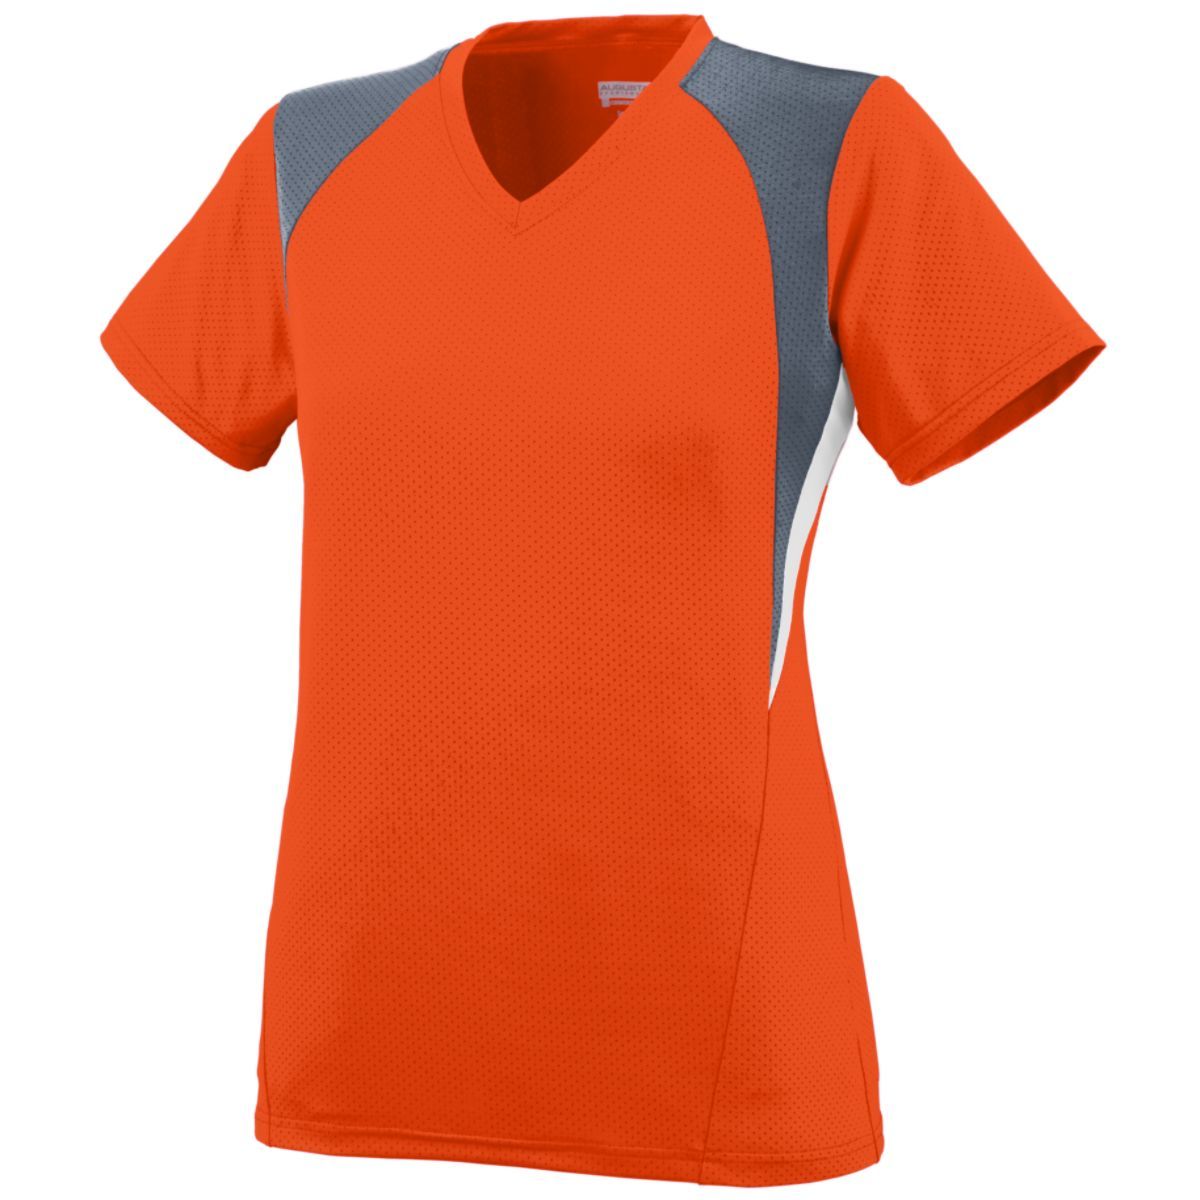 Augusta Sportswear Girls Mystic Jersey in Orange/Graphite/White  -Part of the Girls, Augusta-Products, Soccer, Girls-Jersey, Shirts, All-Sports-1 product lines at KanaleyCreations.com